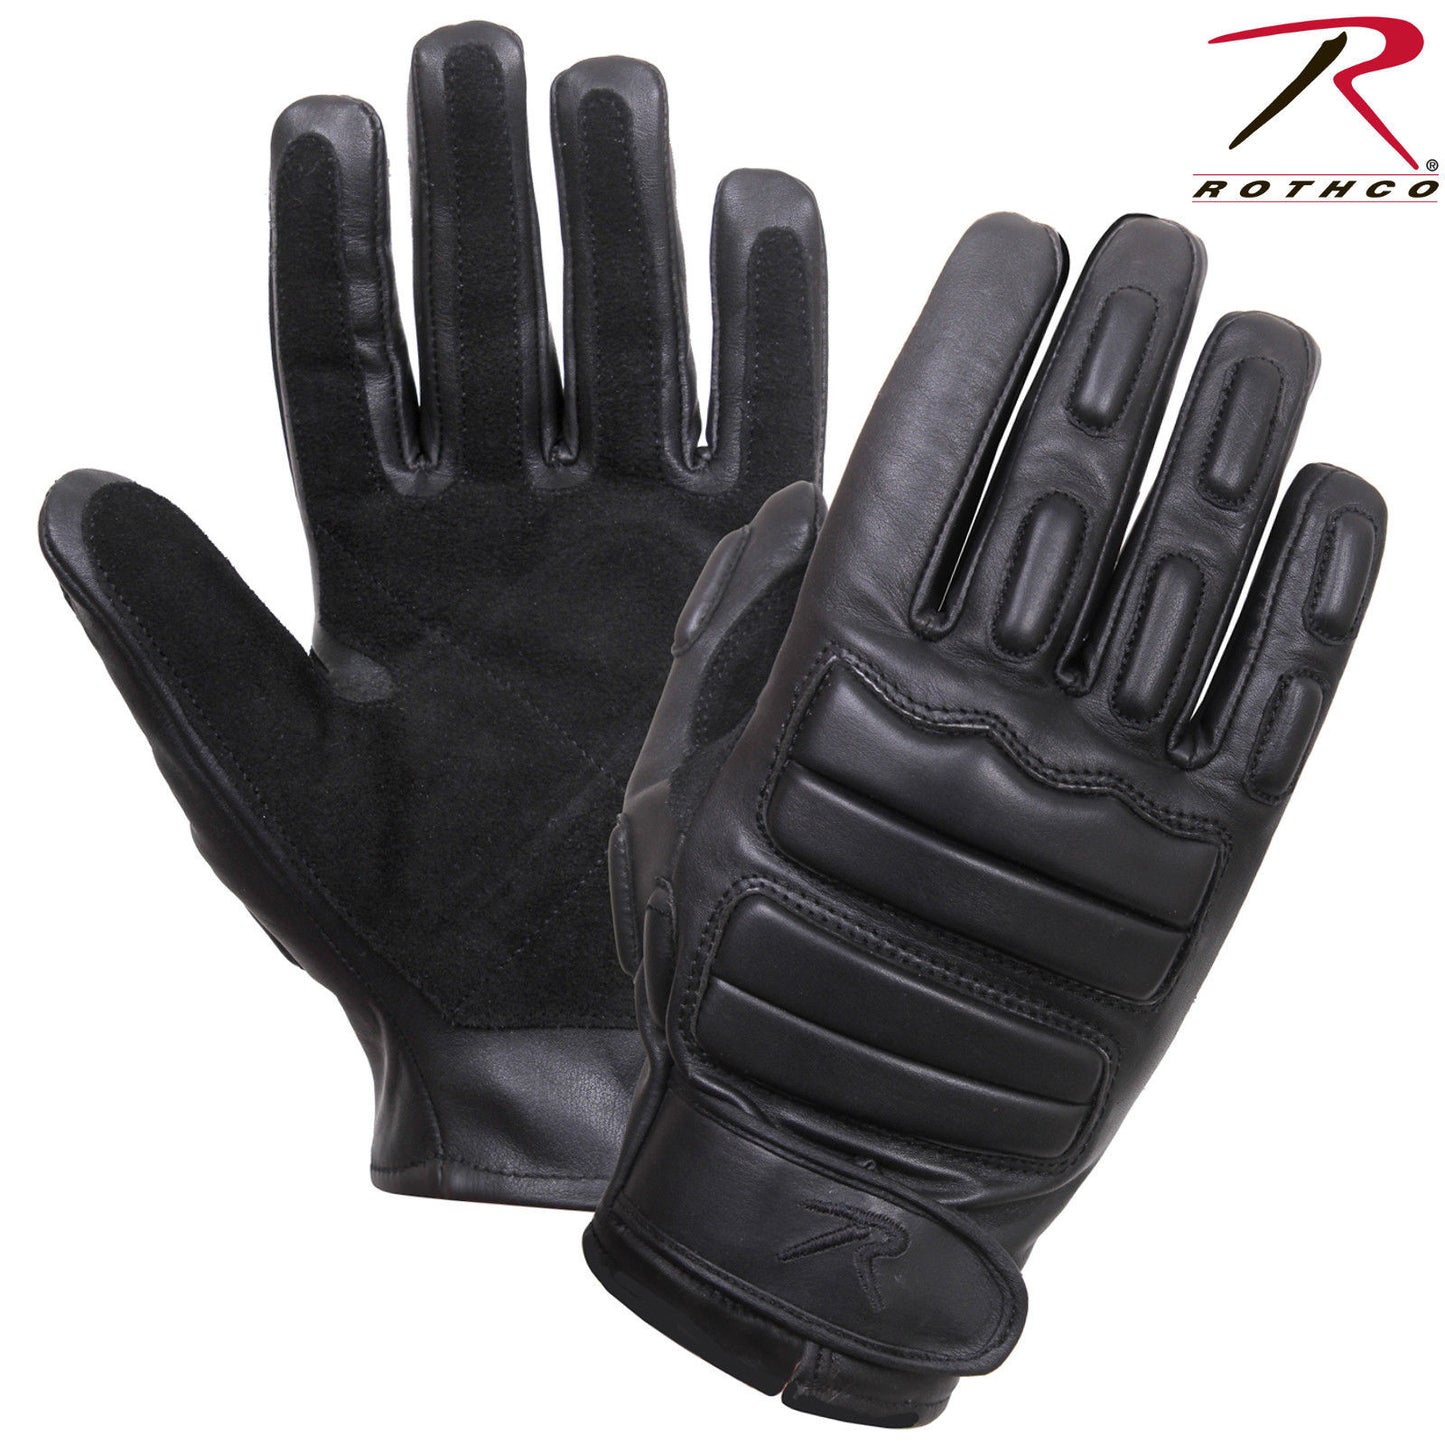 Rothco Black Tactical Full Finger Padded Gloves - Leather & Suede Gloves 2816